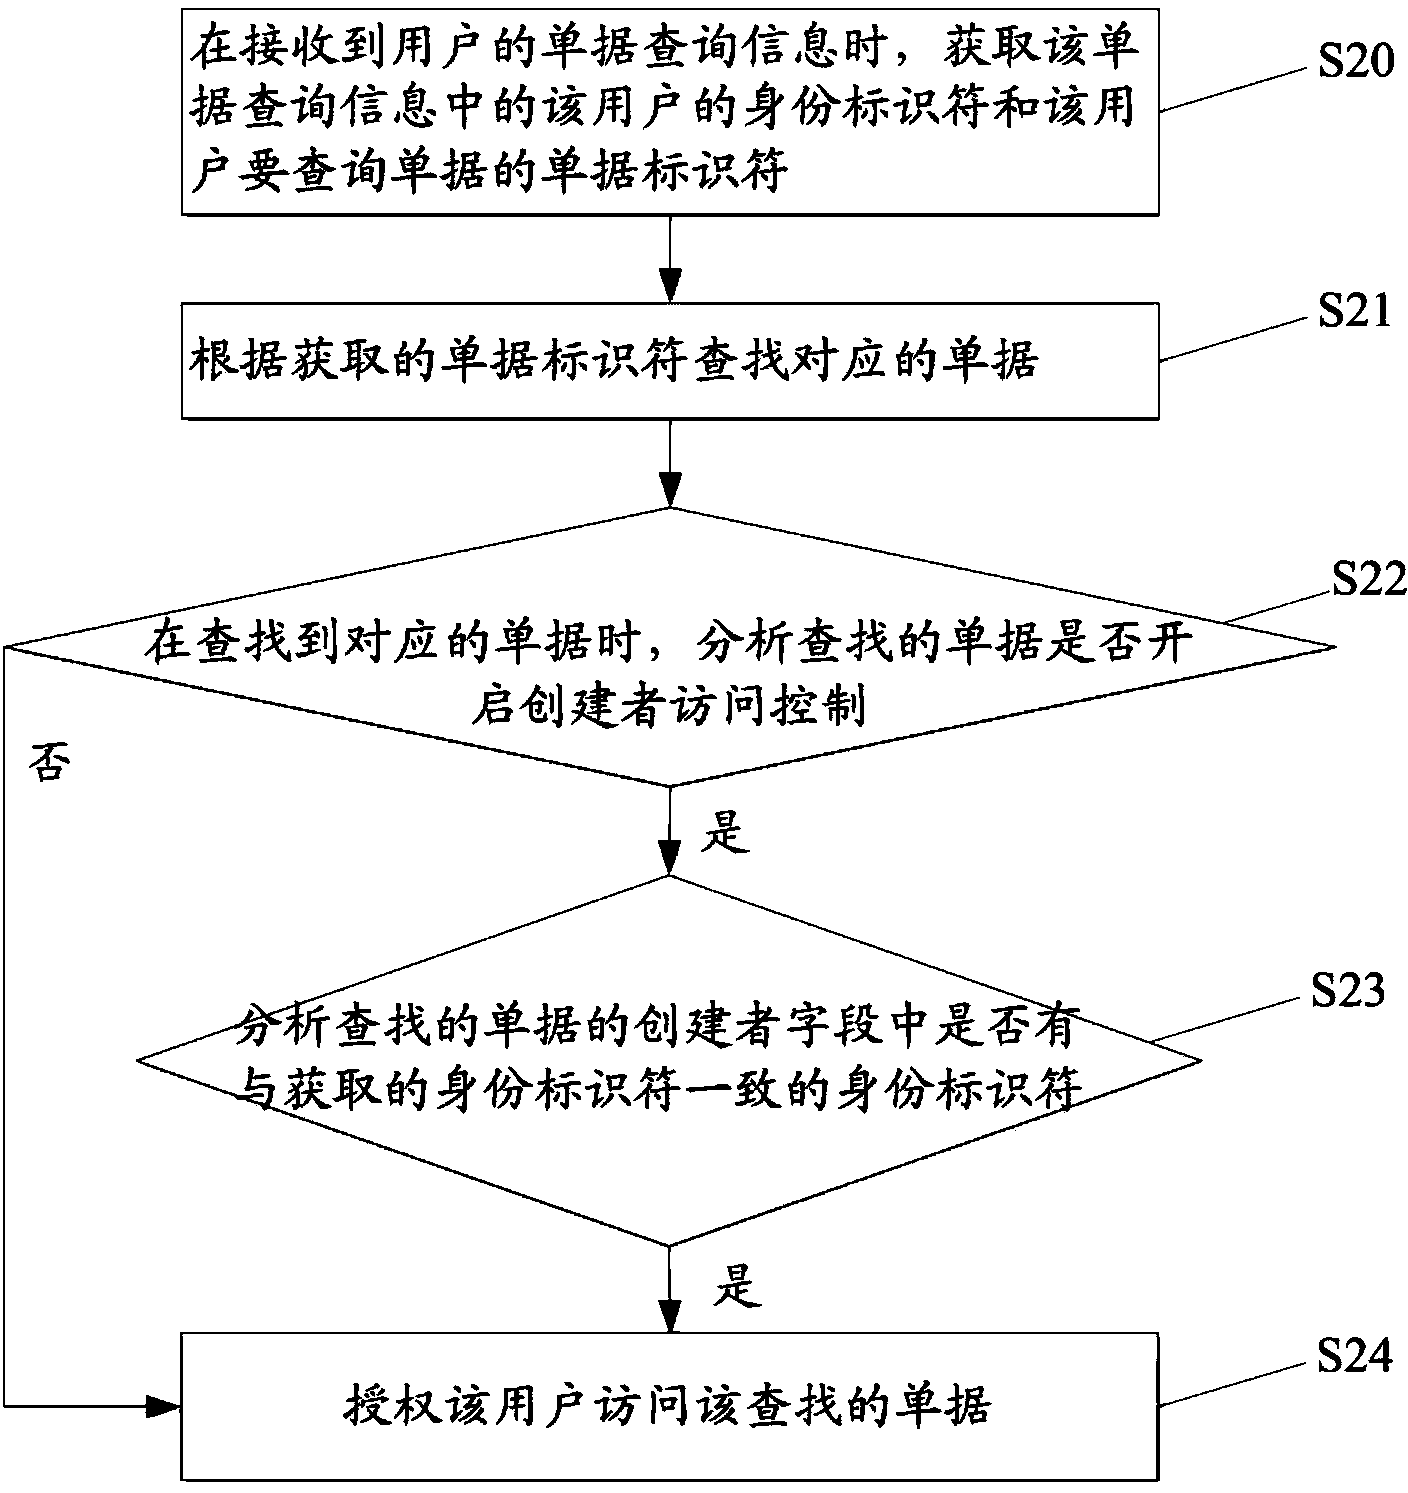 Receipt access control method and device